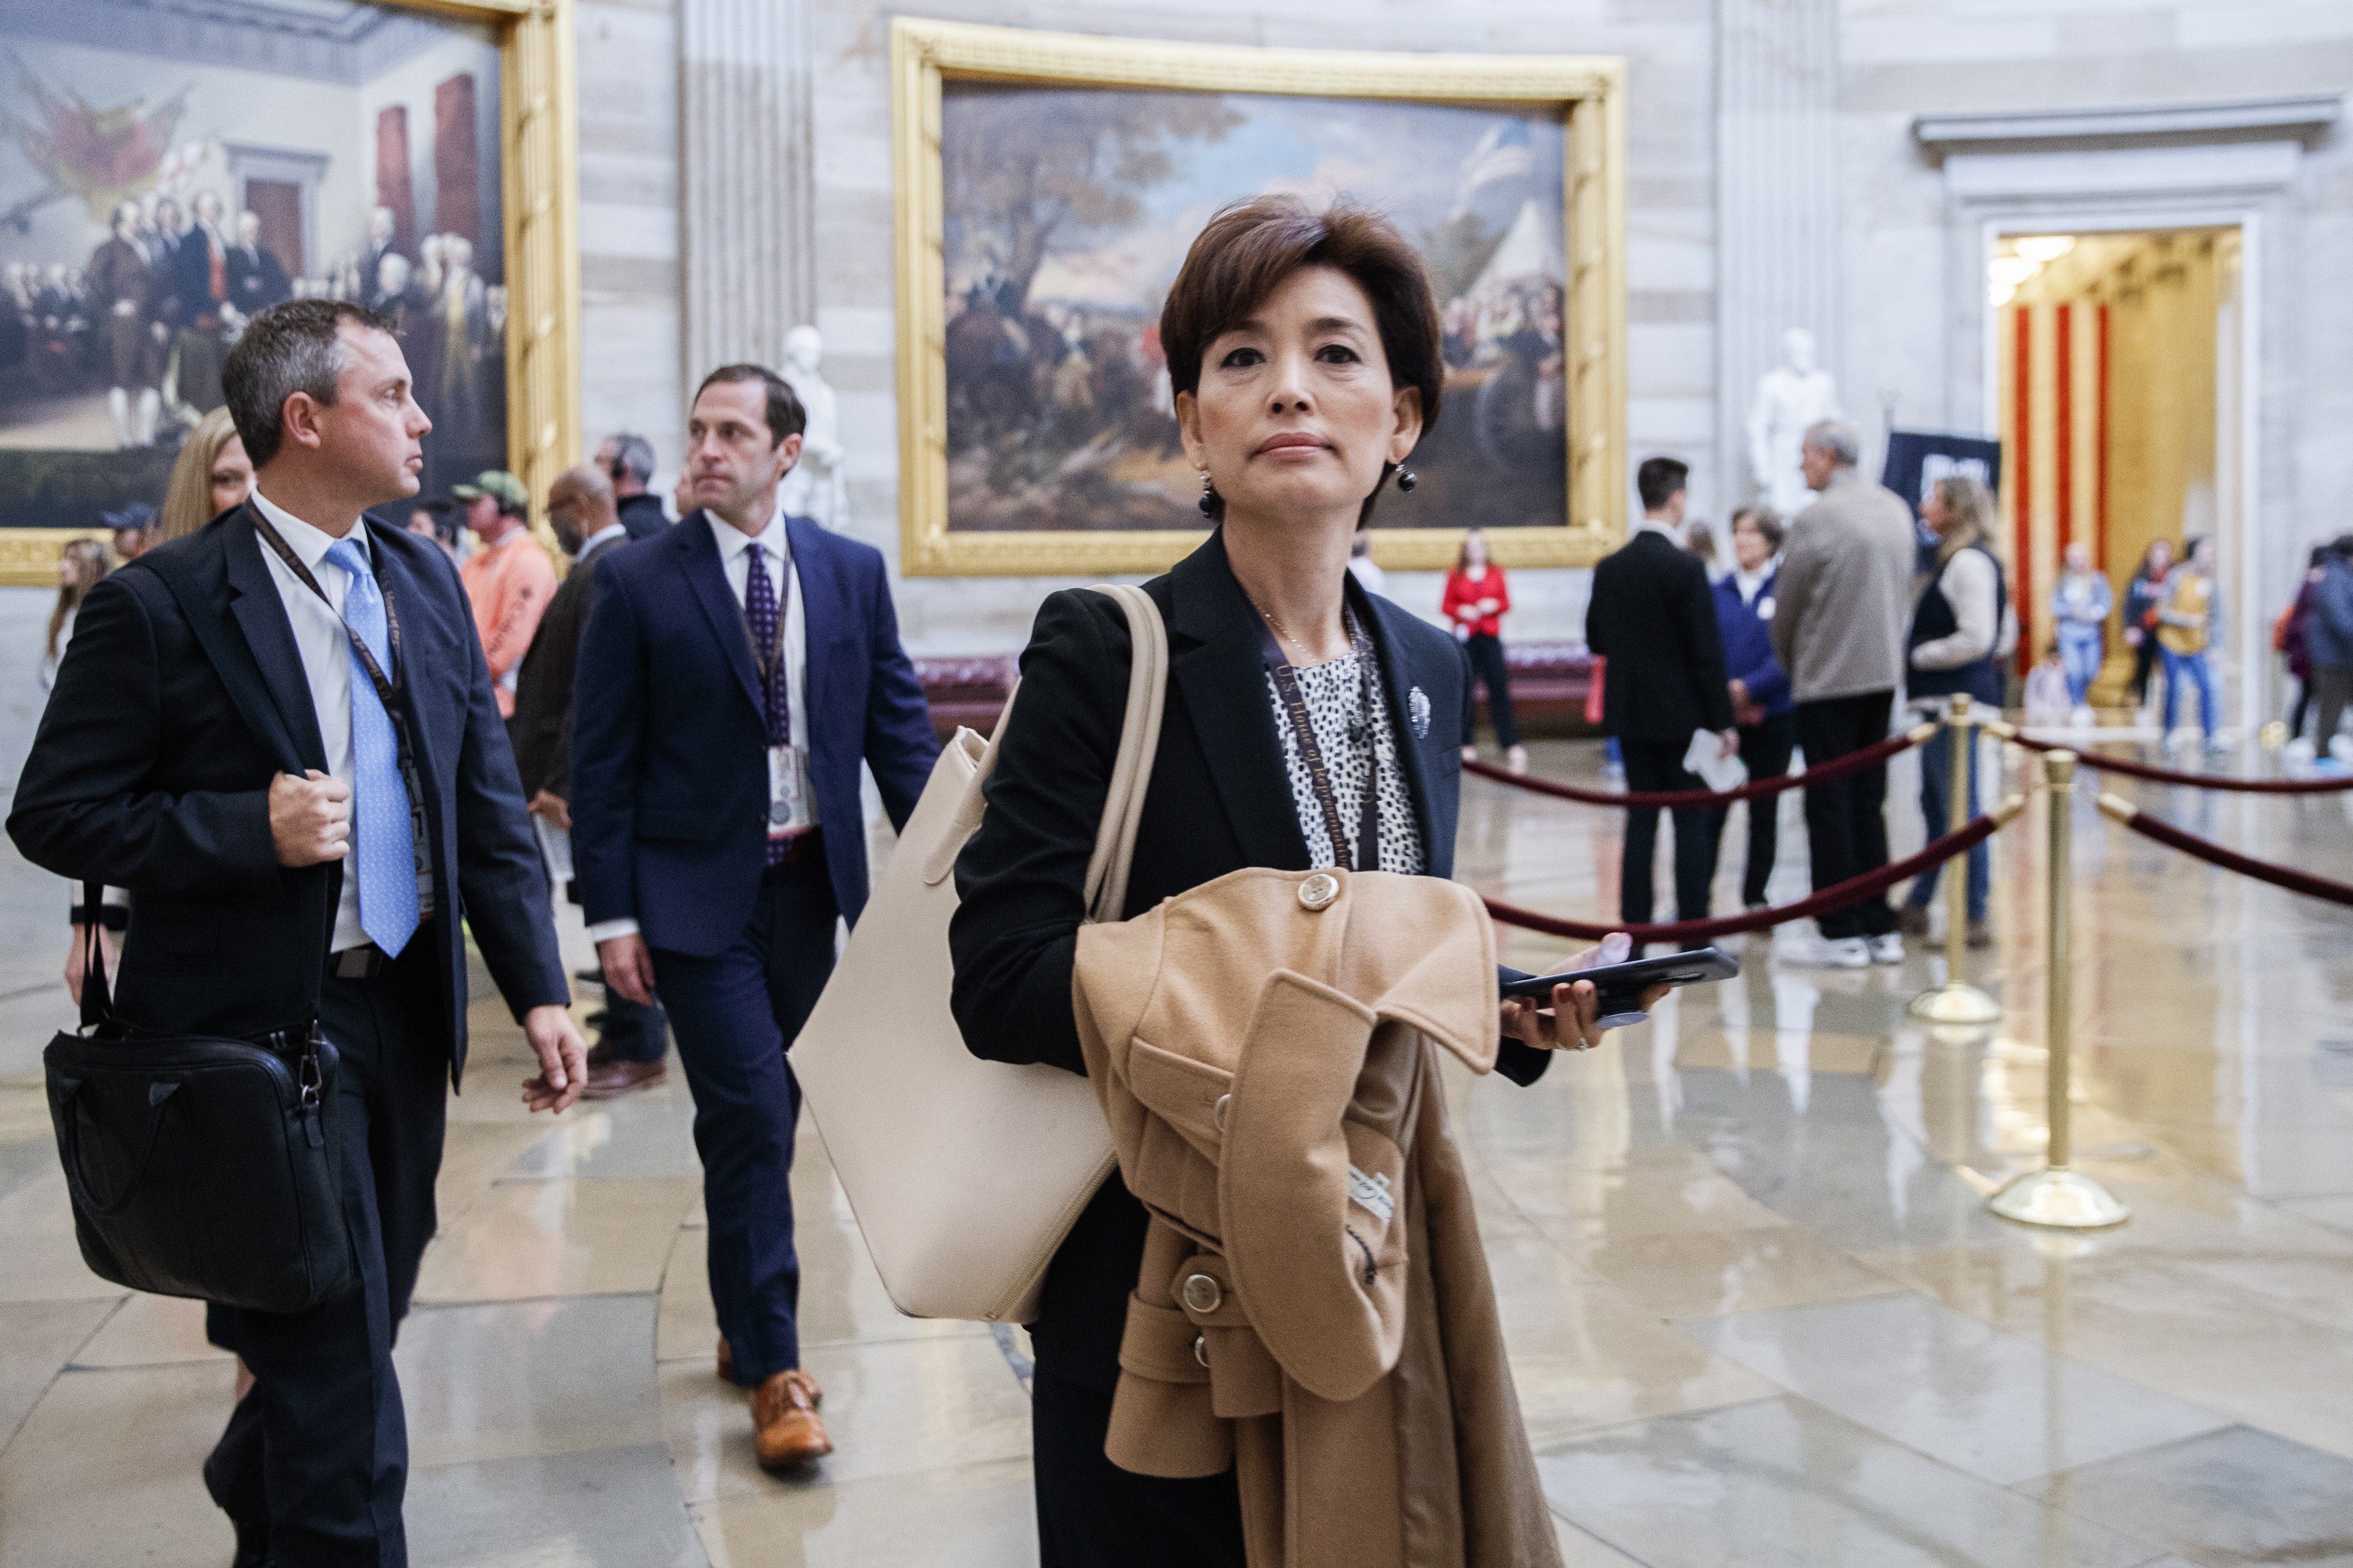 Young Kim, who was born in South Korea and raised in Guam, ran on a platform of representing small business owners and largely avoided mentioning her party’s leader, President Donald Trump, during her campaign. Photo: EPA